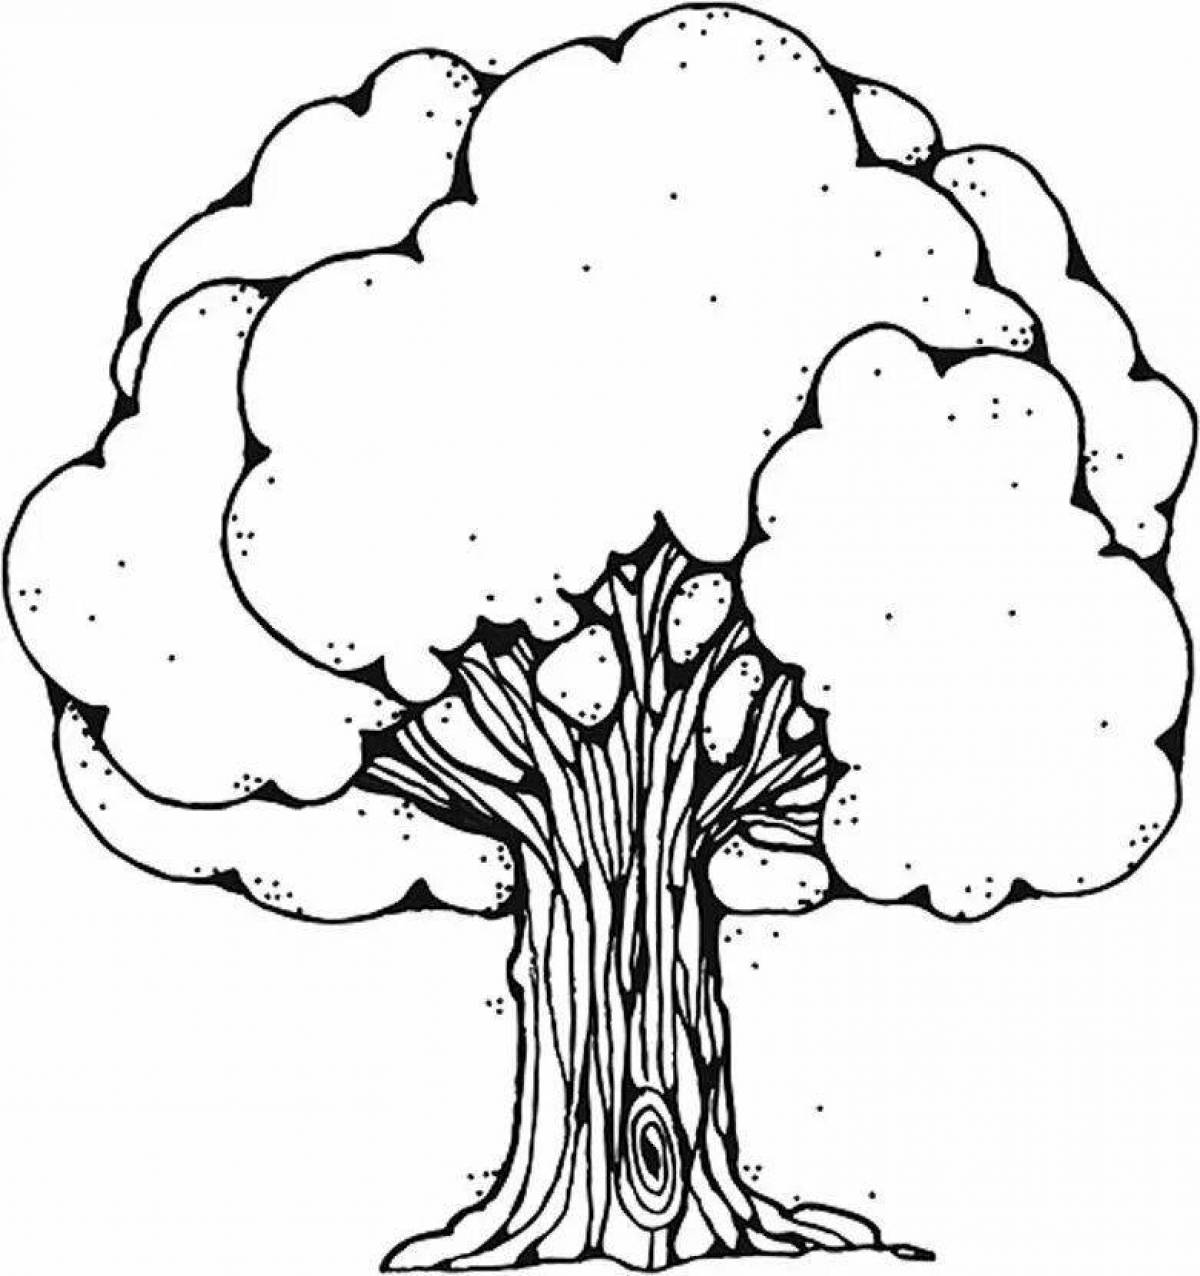 Coloring page bright oak tree for kids